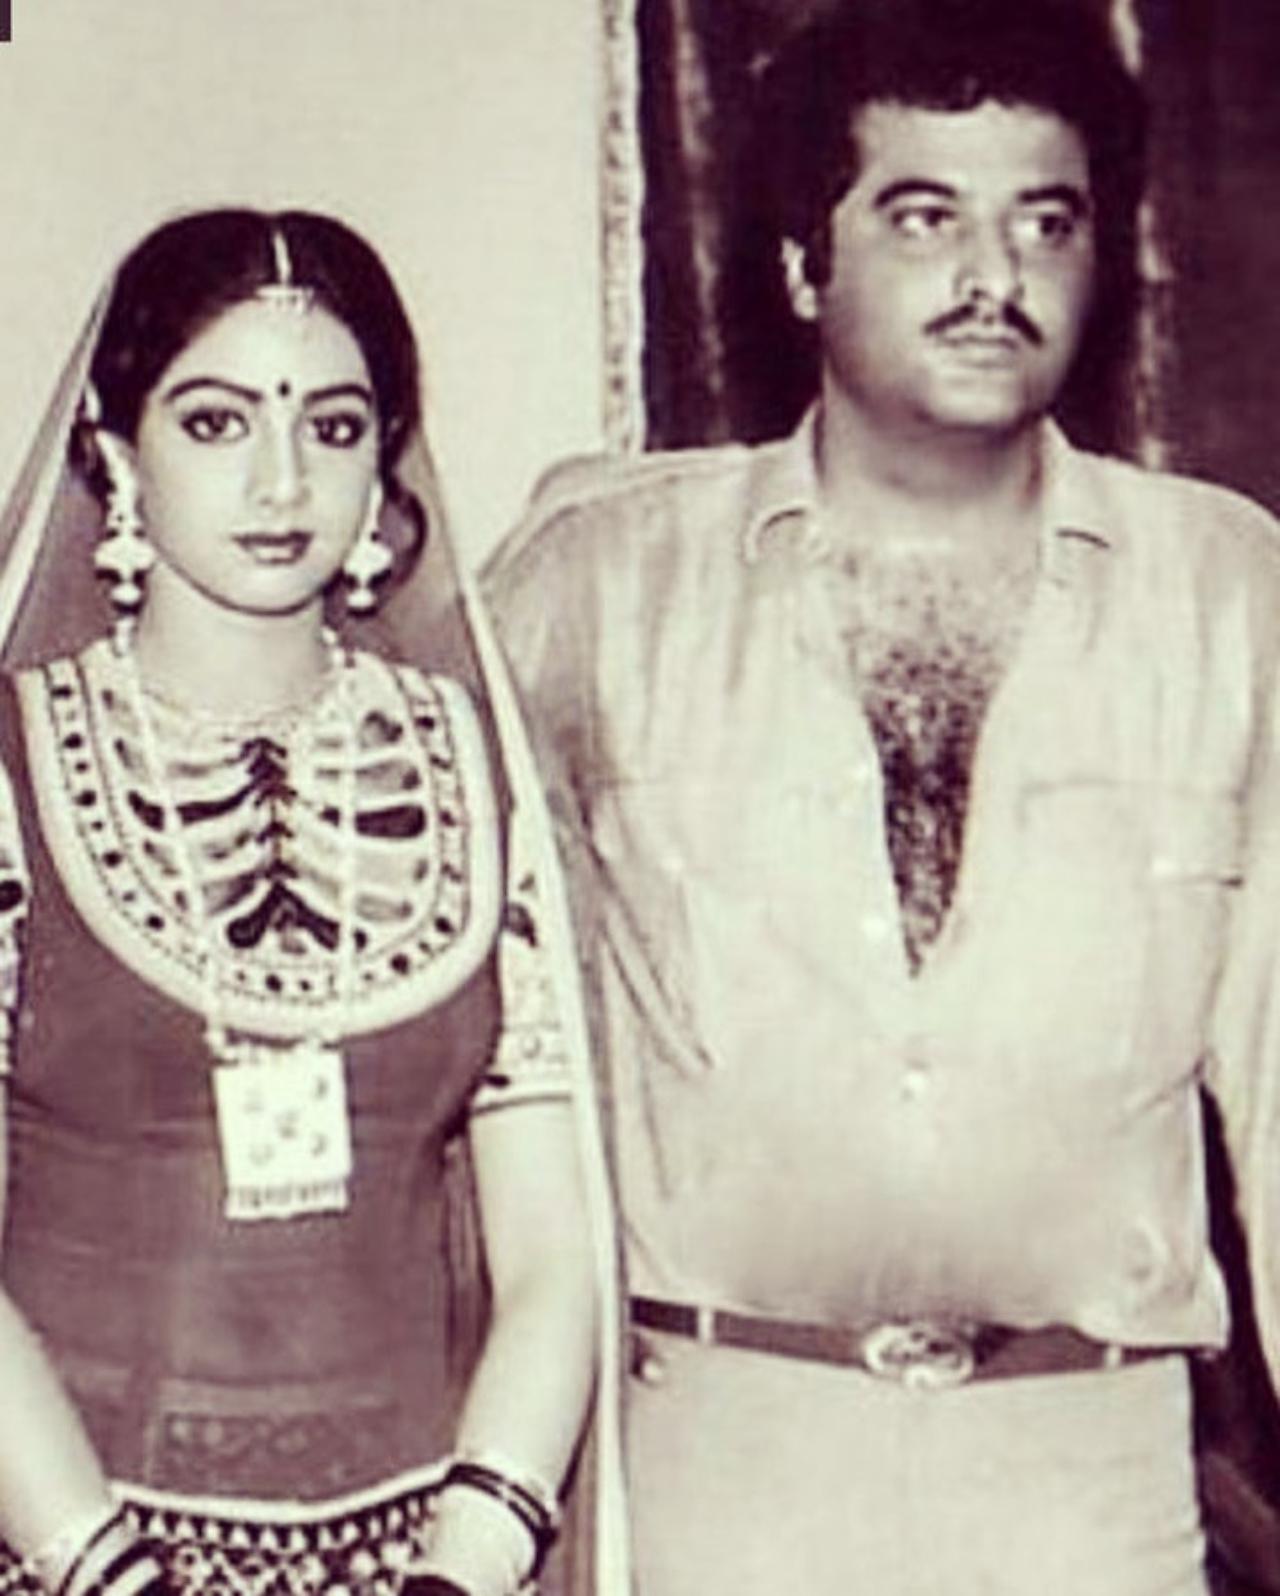 This is Boney Kapoor and Sridevi's first picture together clicked in September 1984 at Natraj Studios